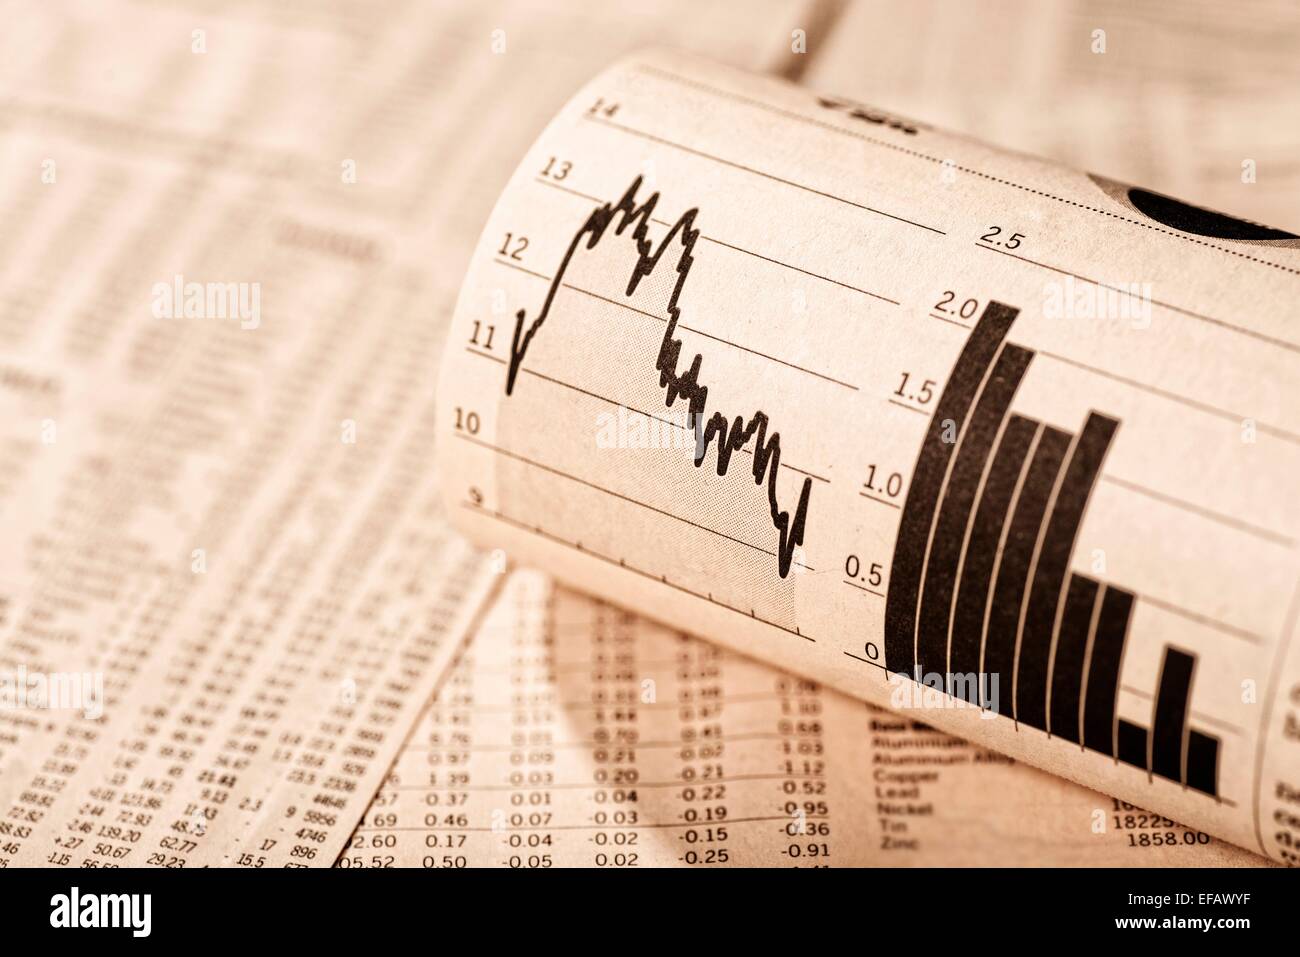 Exchange rate tables and diagrams show different stock prices. 2015 Stock Photo